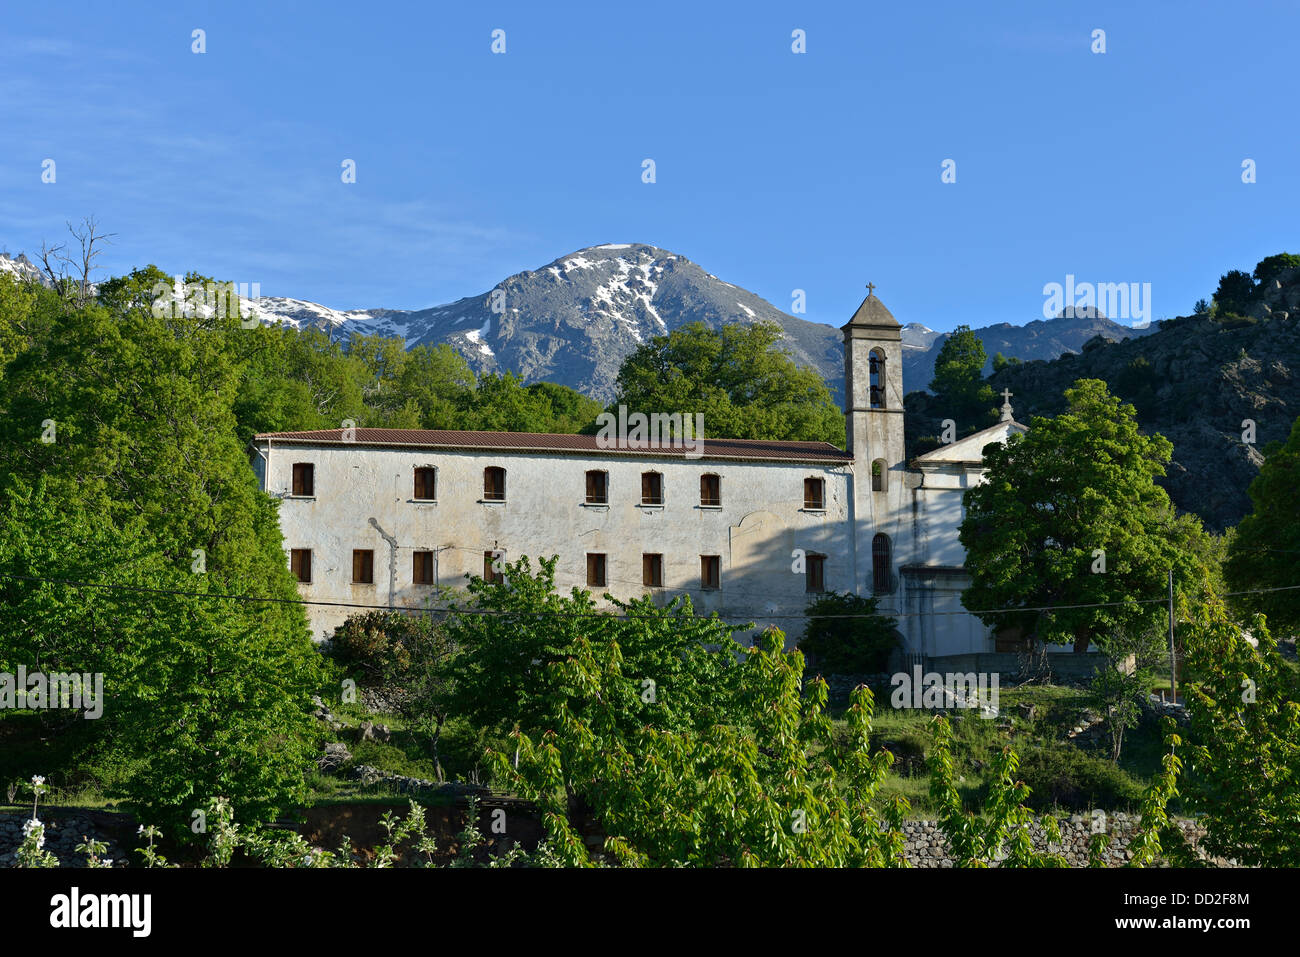 Old convent with Monte Cinto in the background, Calacuccia, Niolo Valley, Corsica, France Stock Photo